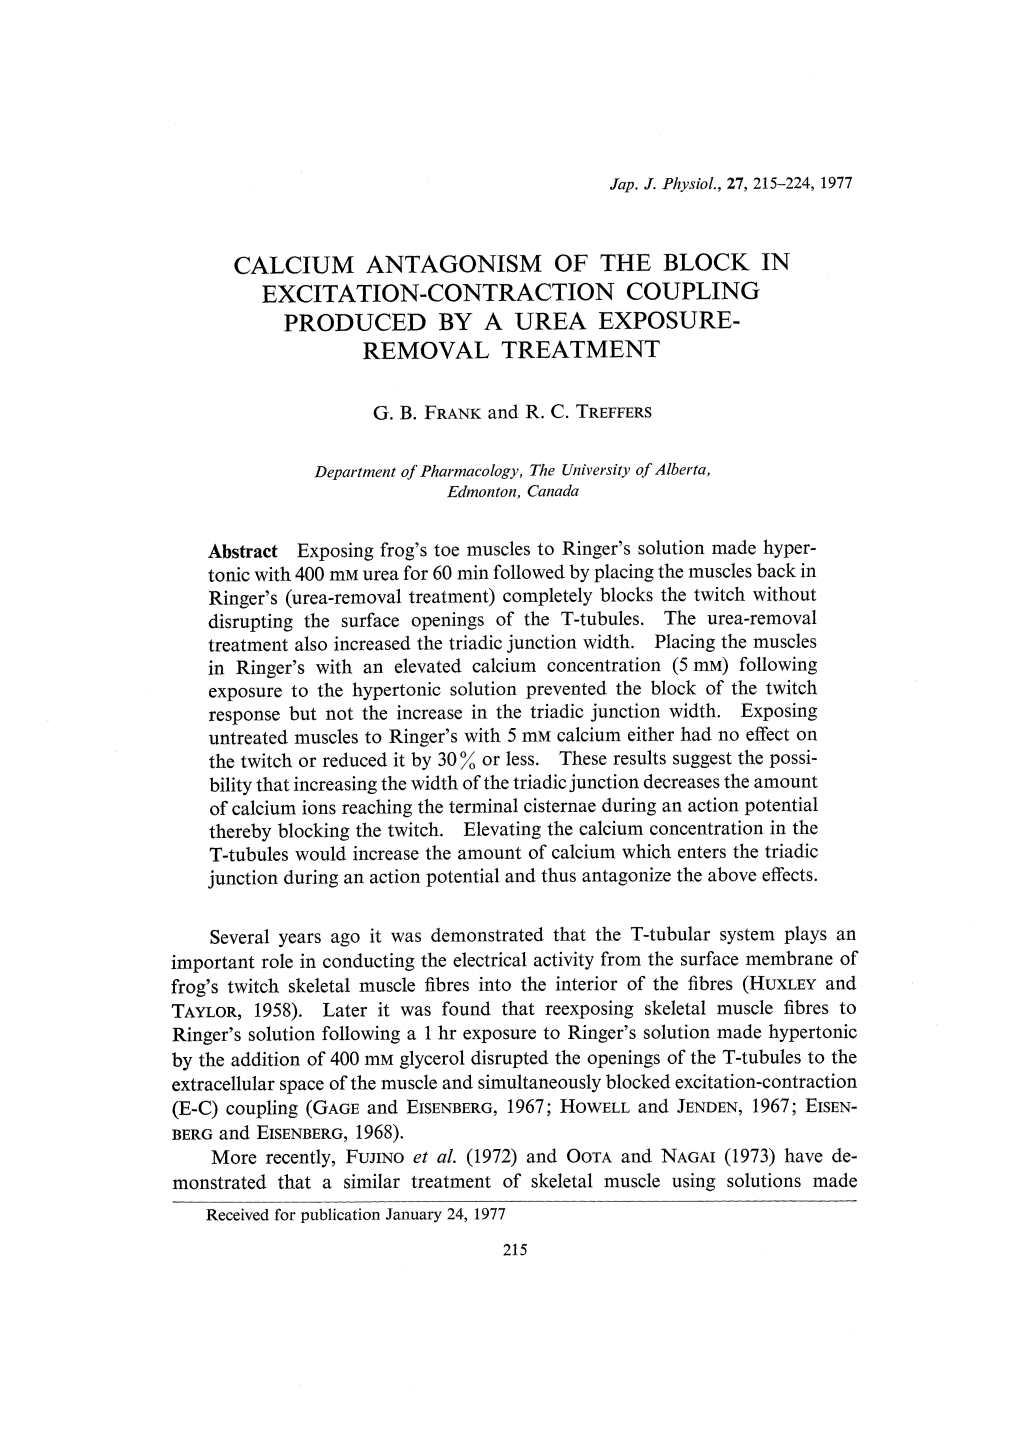 Calcium Antagonism of the Block in Excitation-Contraction Coupling Produced by a Urea Exposure- Removal Treatment